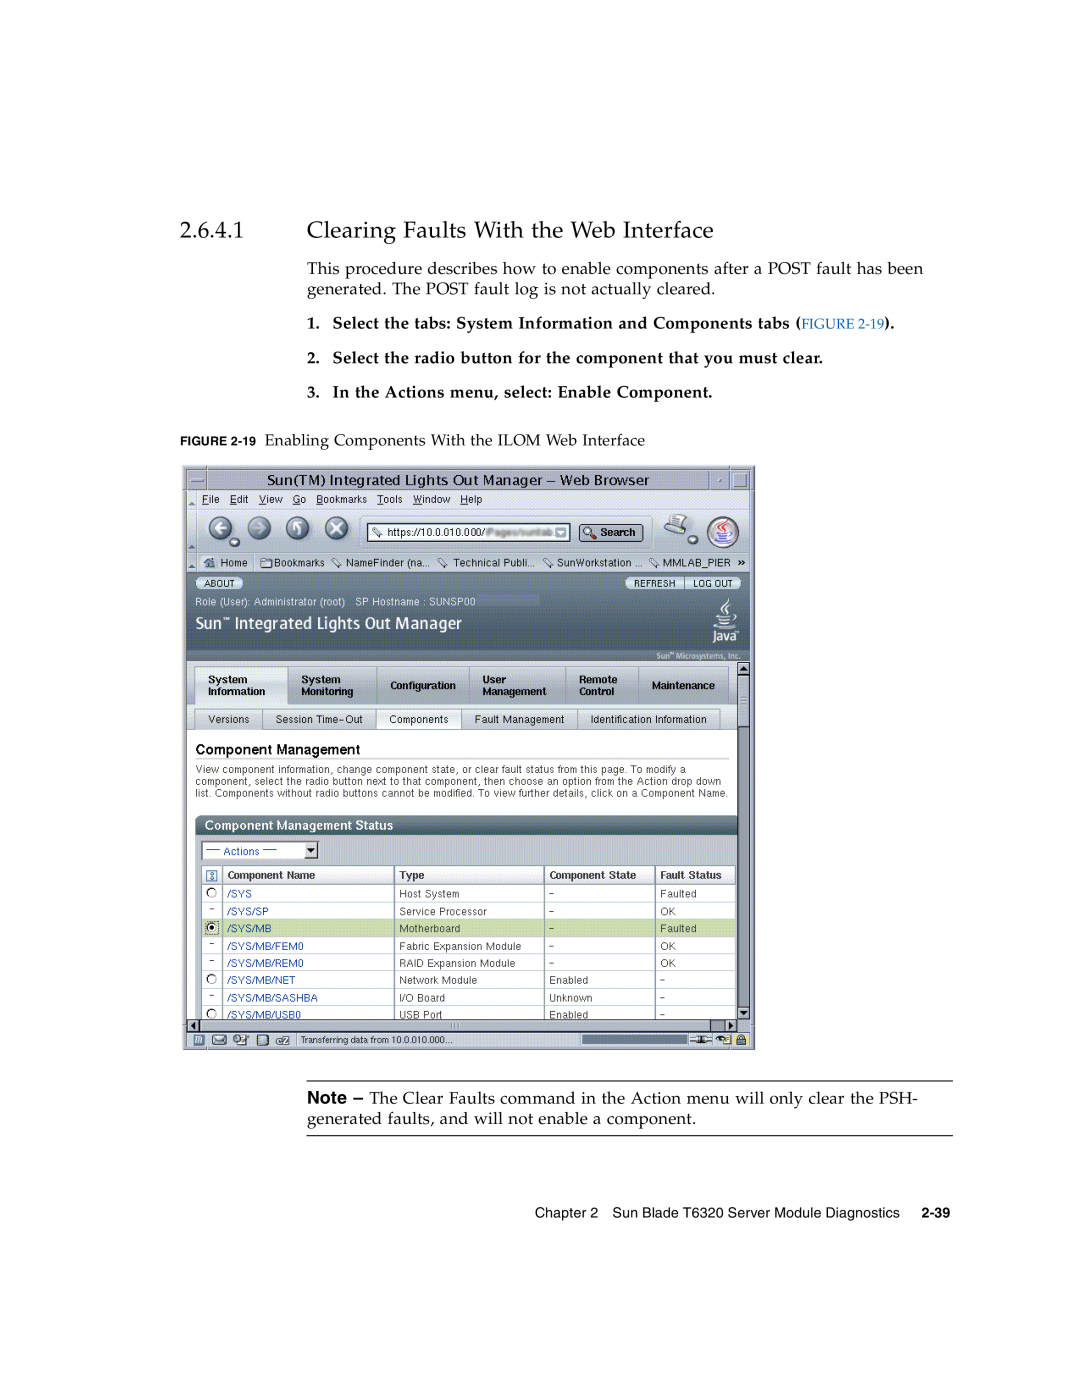 Sun Microsystems T6320 service manual Clearing Faults With the Web Interface, In the Actions menu, select Enable Component 